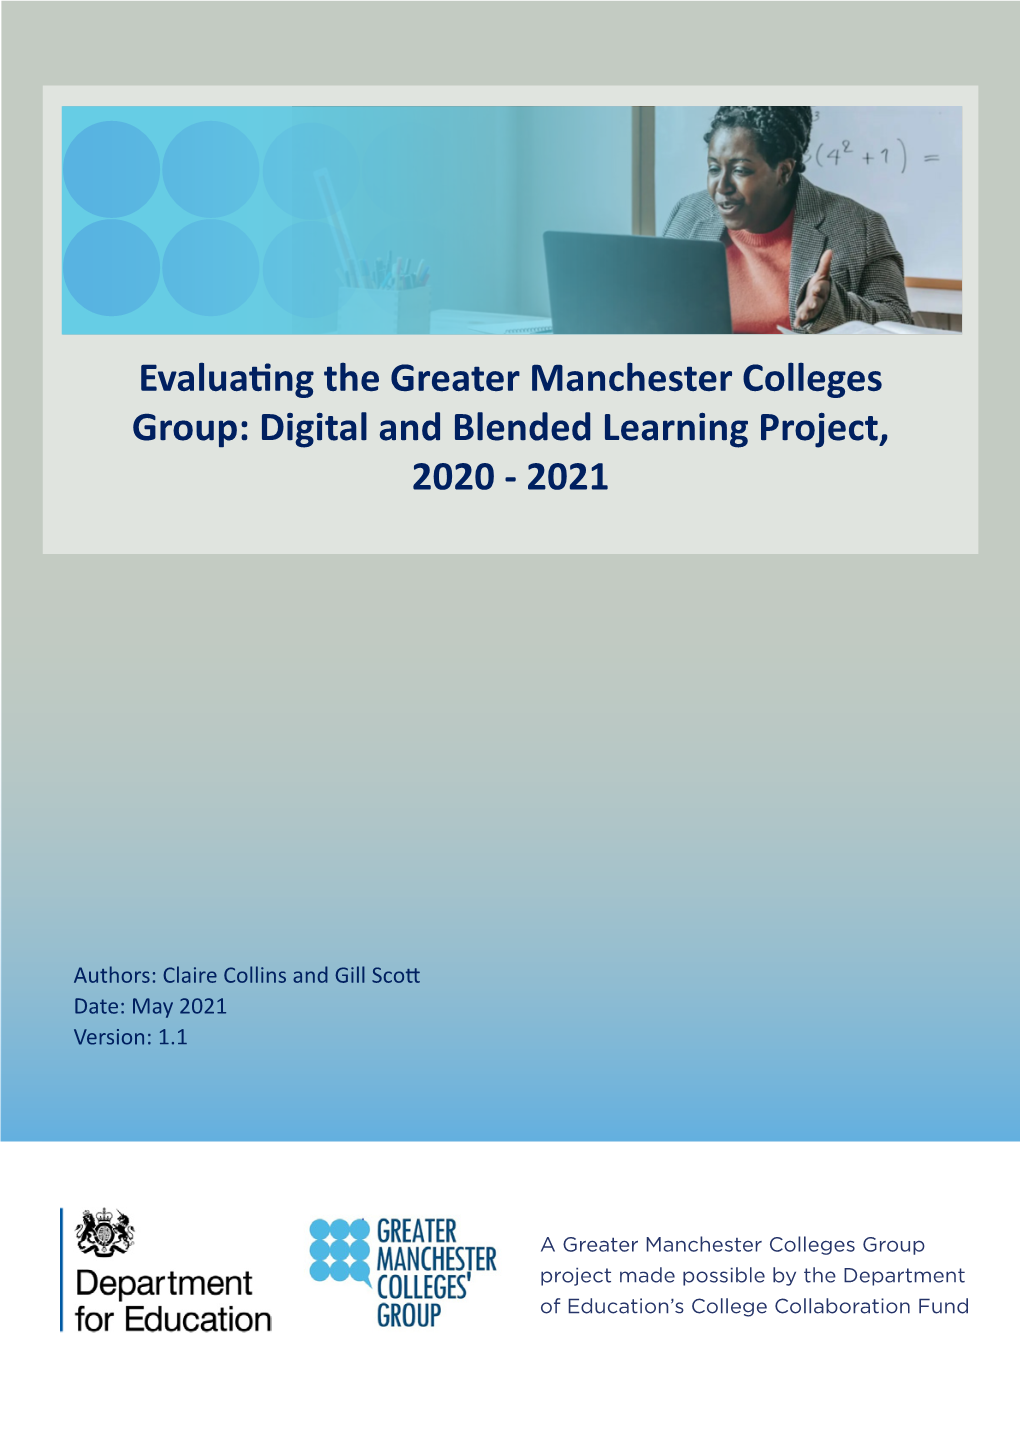 Evaluating the Greater Manchester Colleges Group: Digital and Blended Learning Project, 2020 - 2021